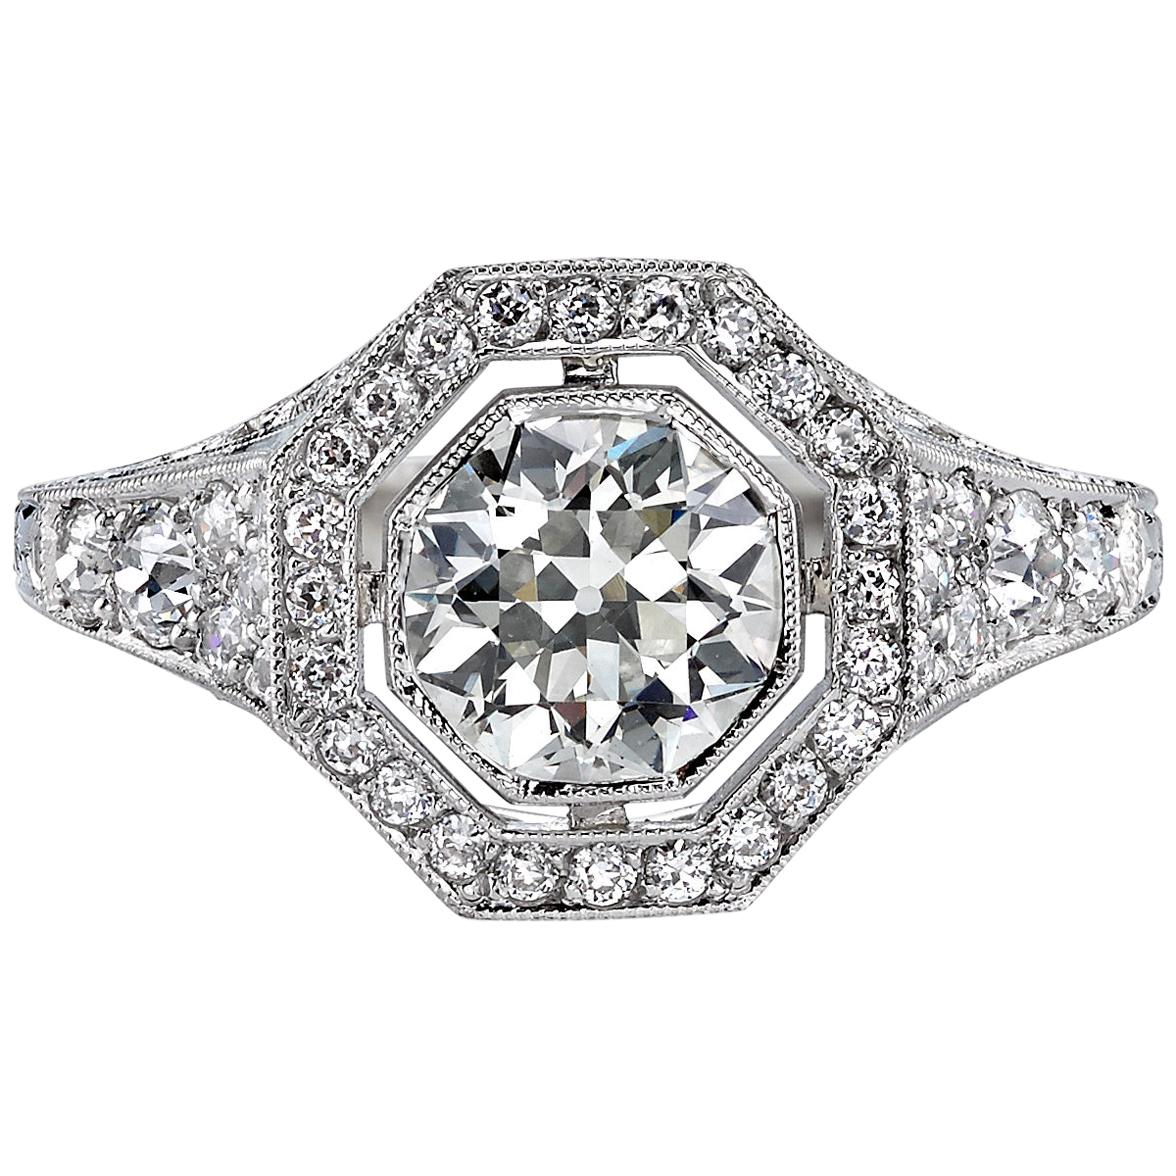 1.04 Carat Old European Cut Diamond Set in a Handcrafted Platinum Ring